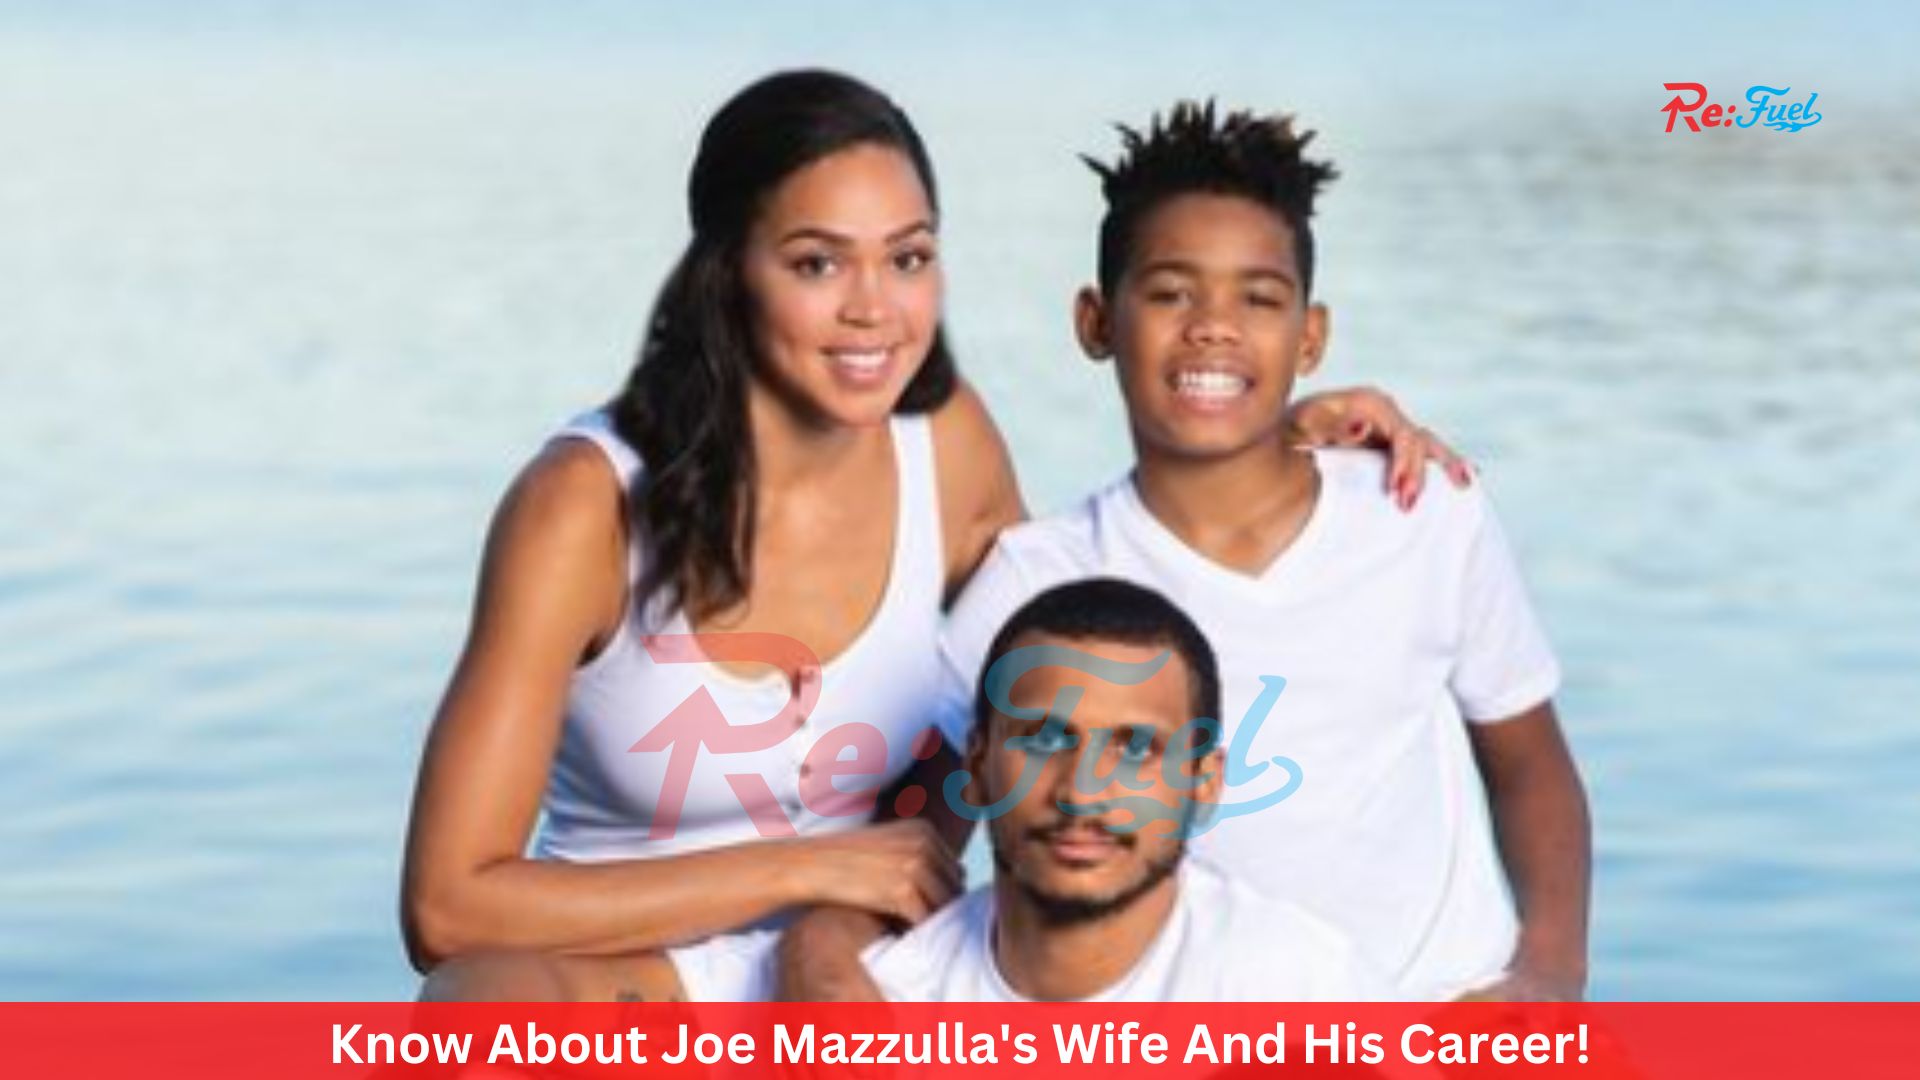 Know About Joe Mazzulla's Wife And His Career!